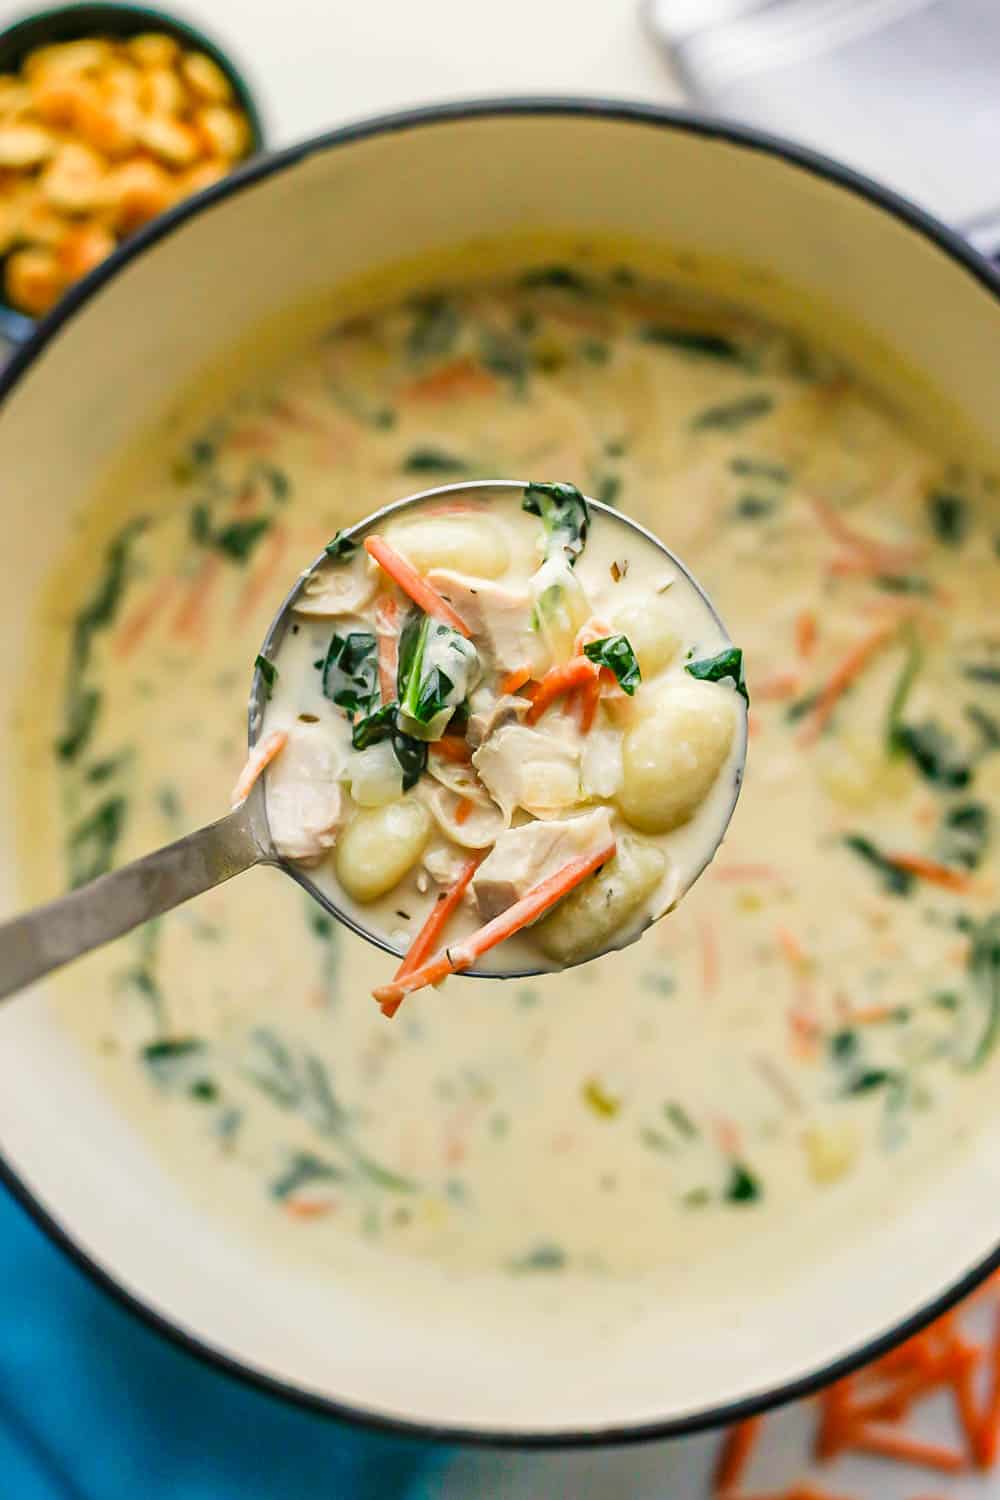 A ladle scooping up chicken gnocchi soup from a large soup pot